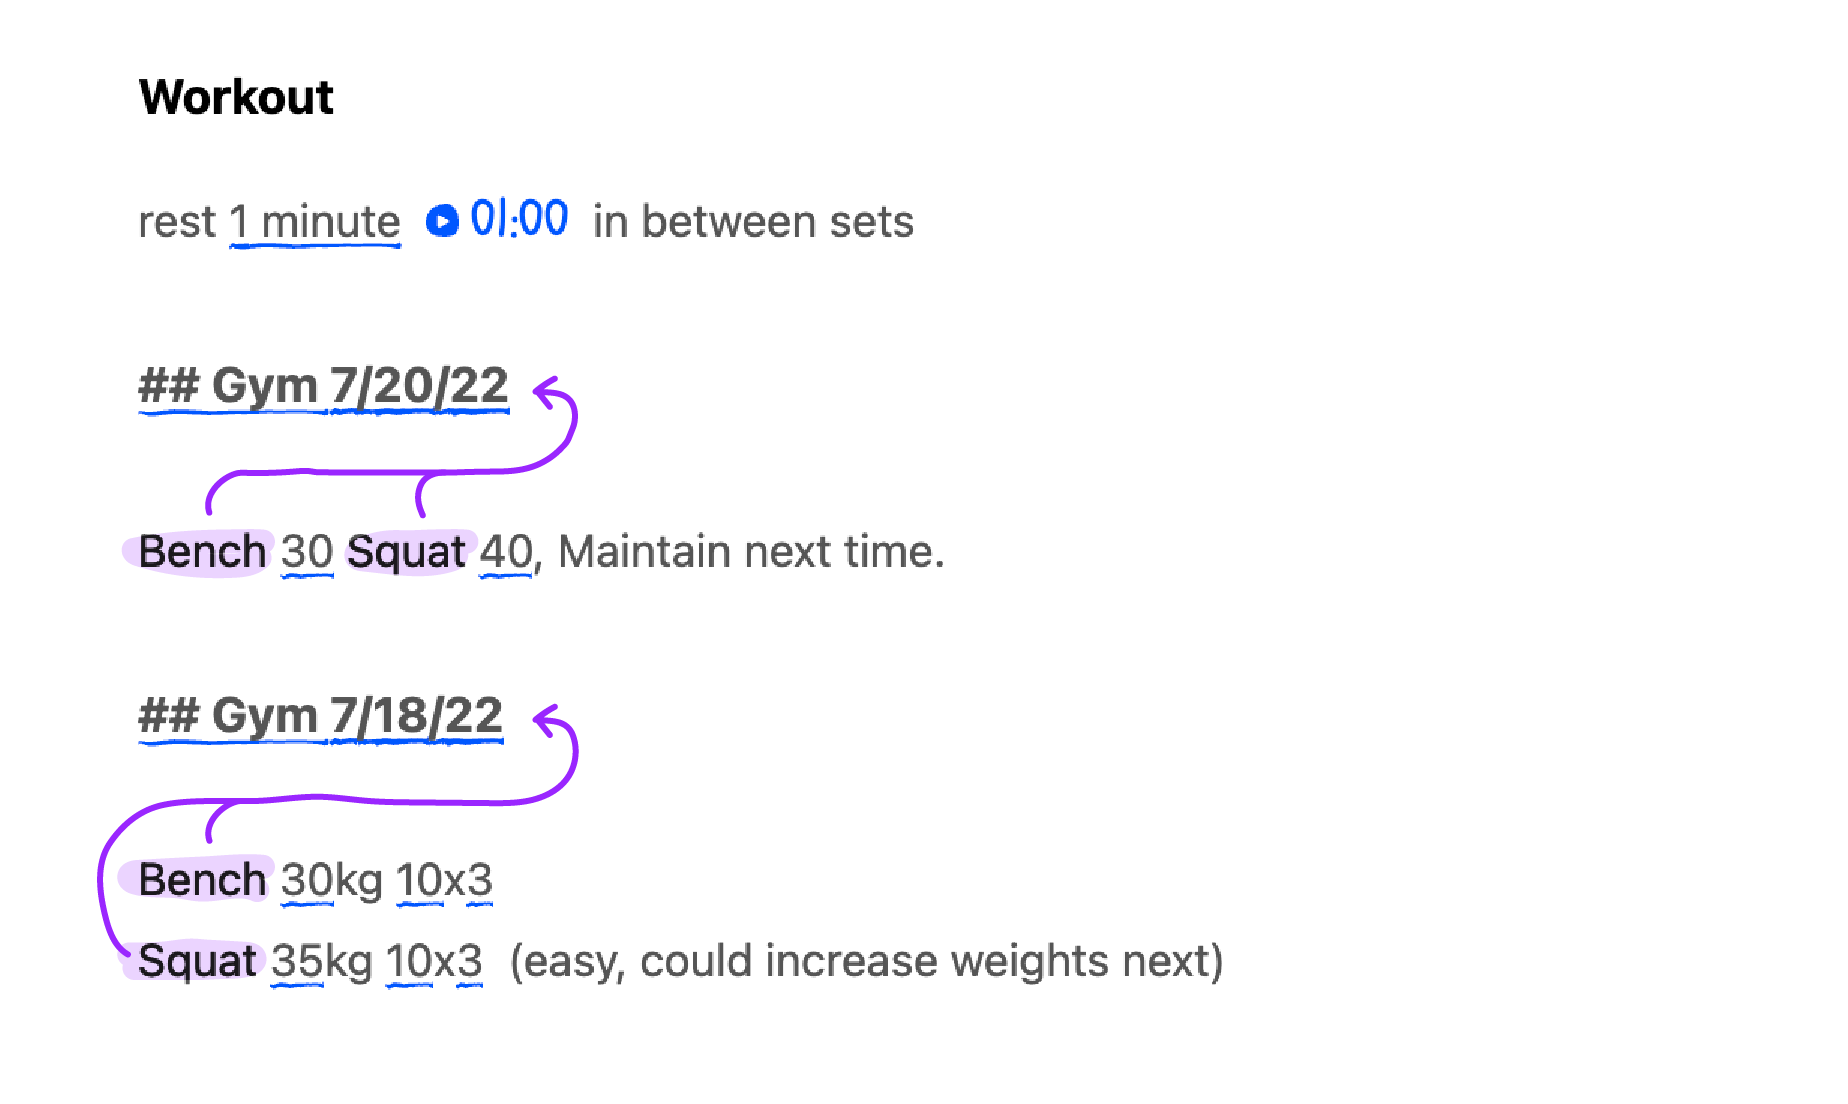 A text note containing dates and exercises like Bench and Squat, with arrows connecting them.